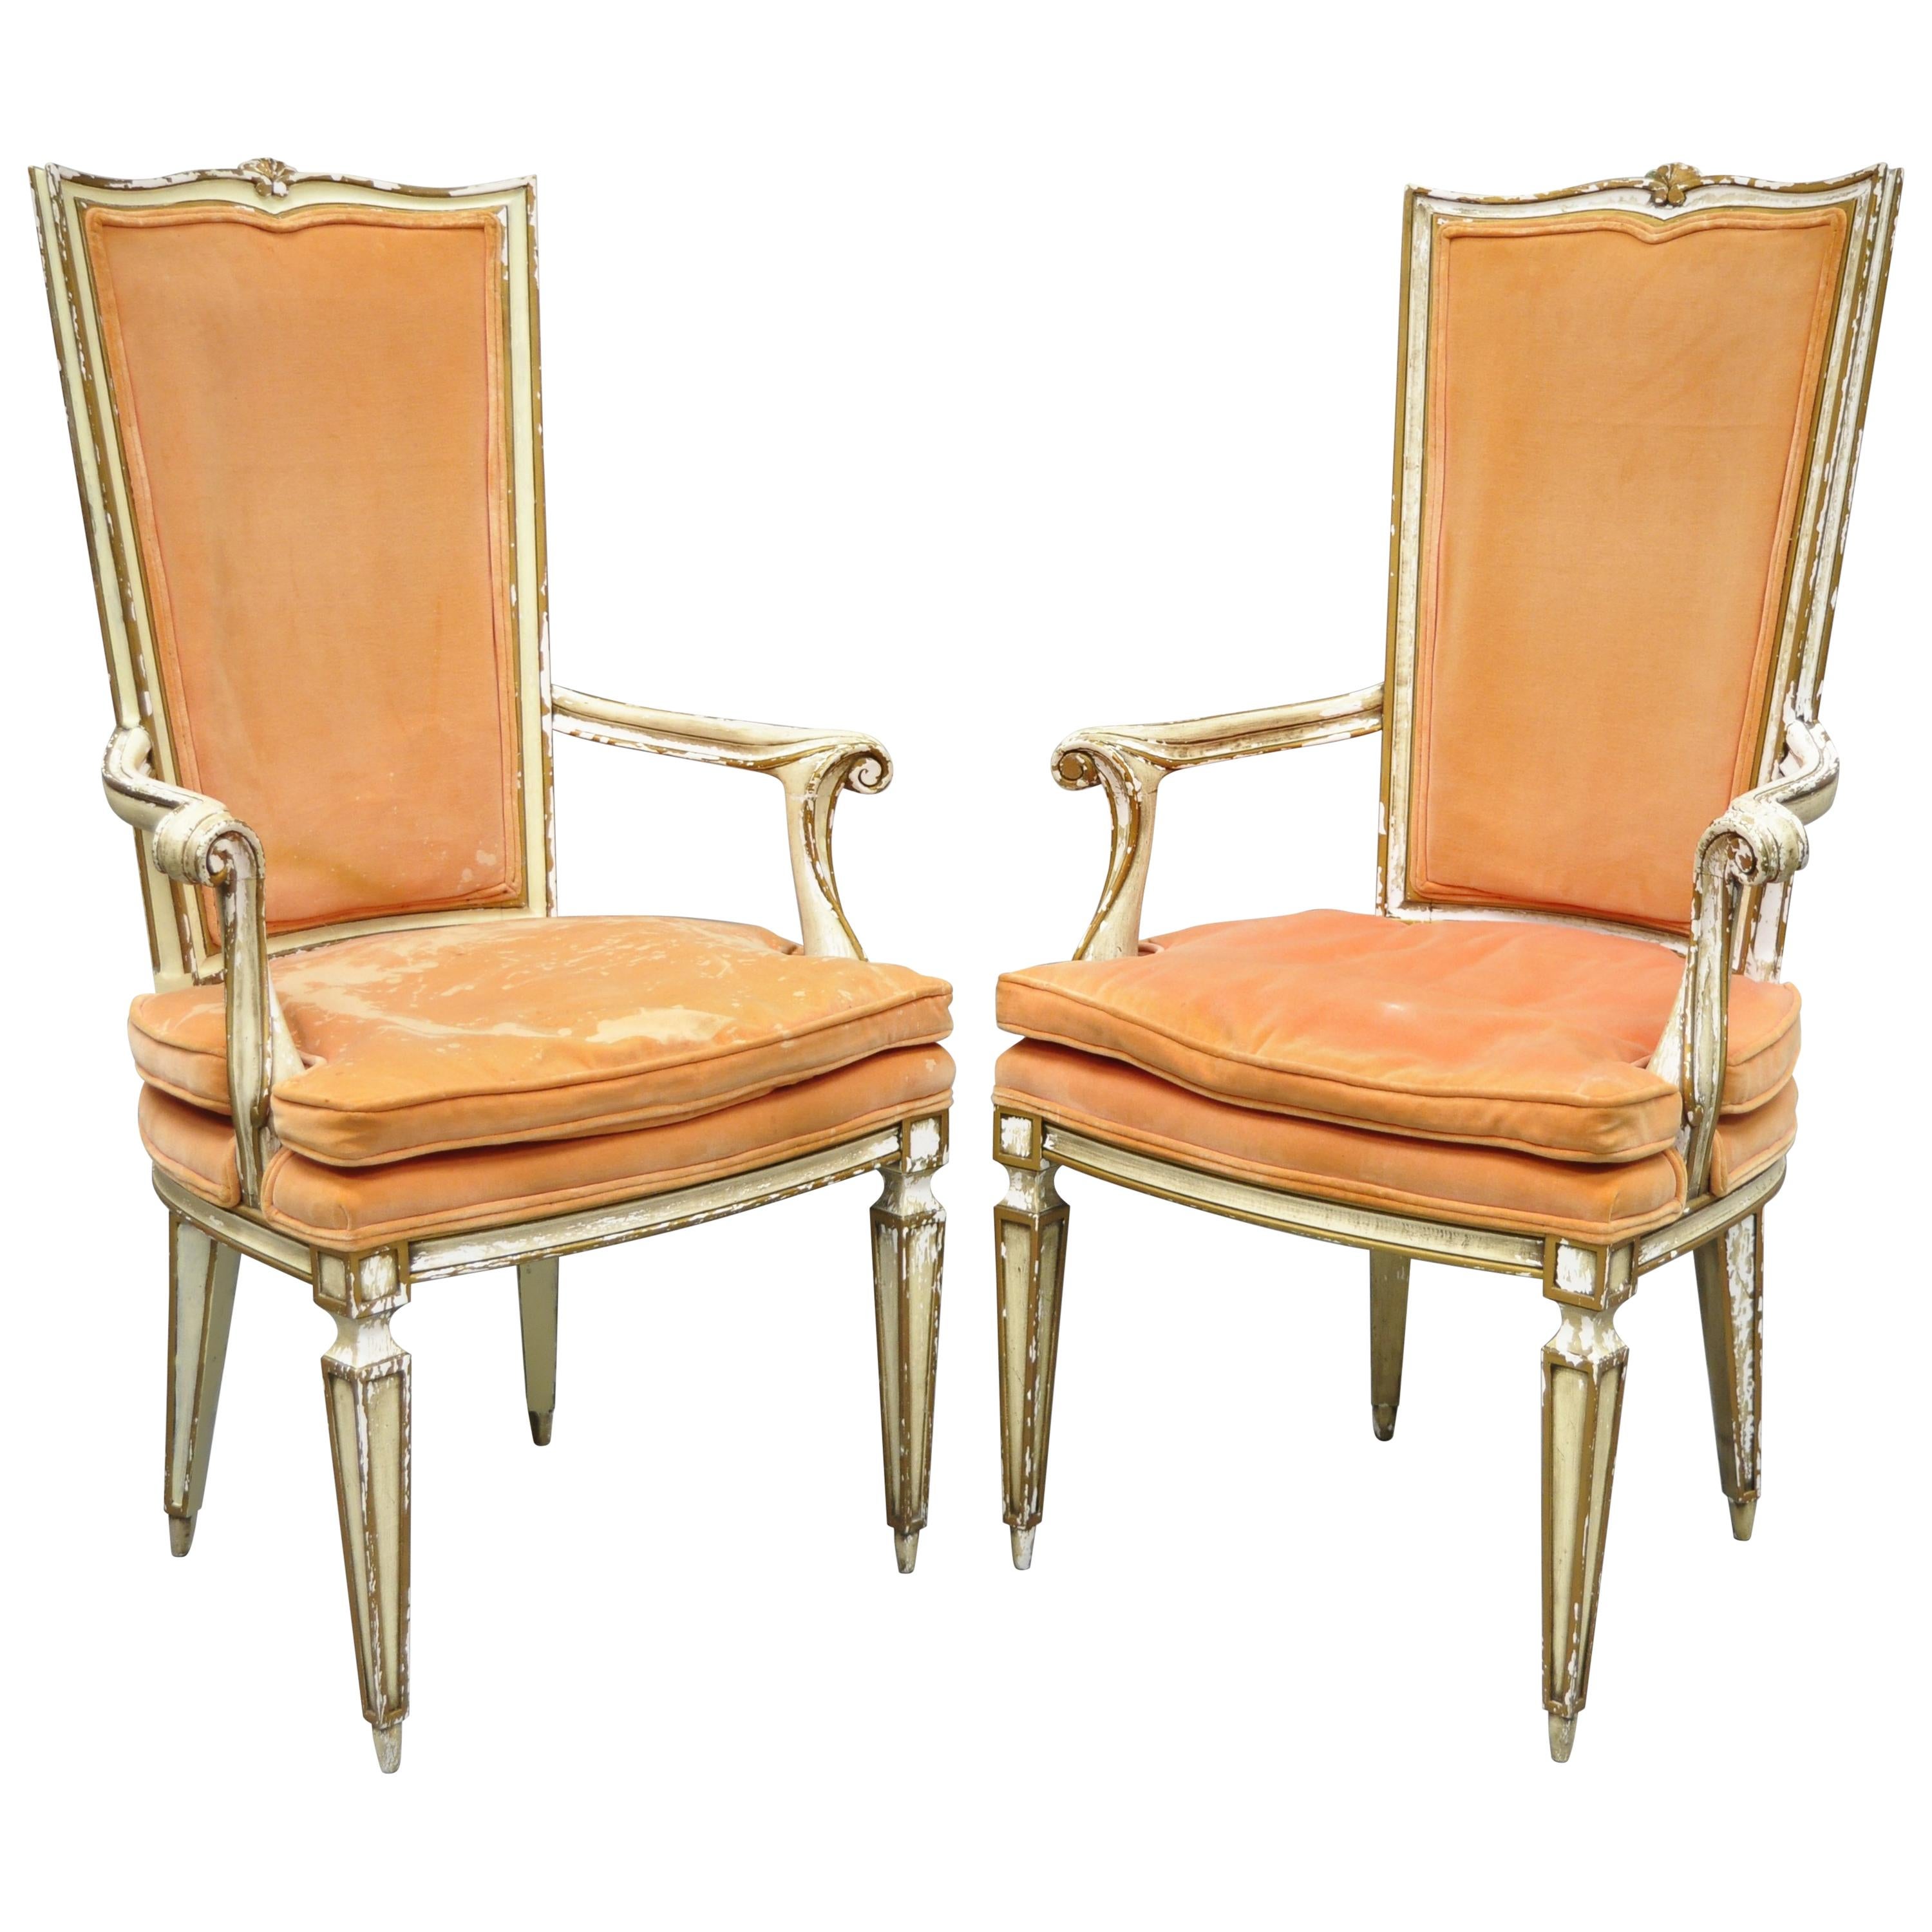 Pair of Karges Italian Venetian Cream & Gold Distress Painted Dining Armchairs